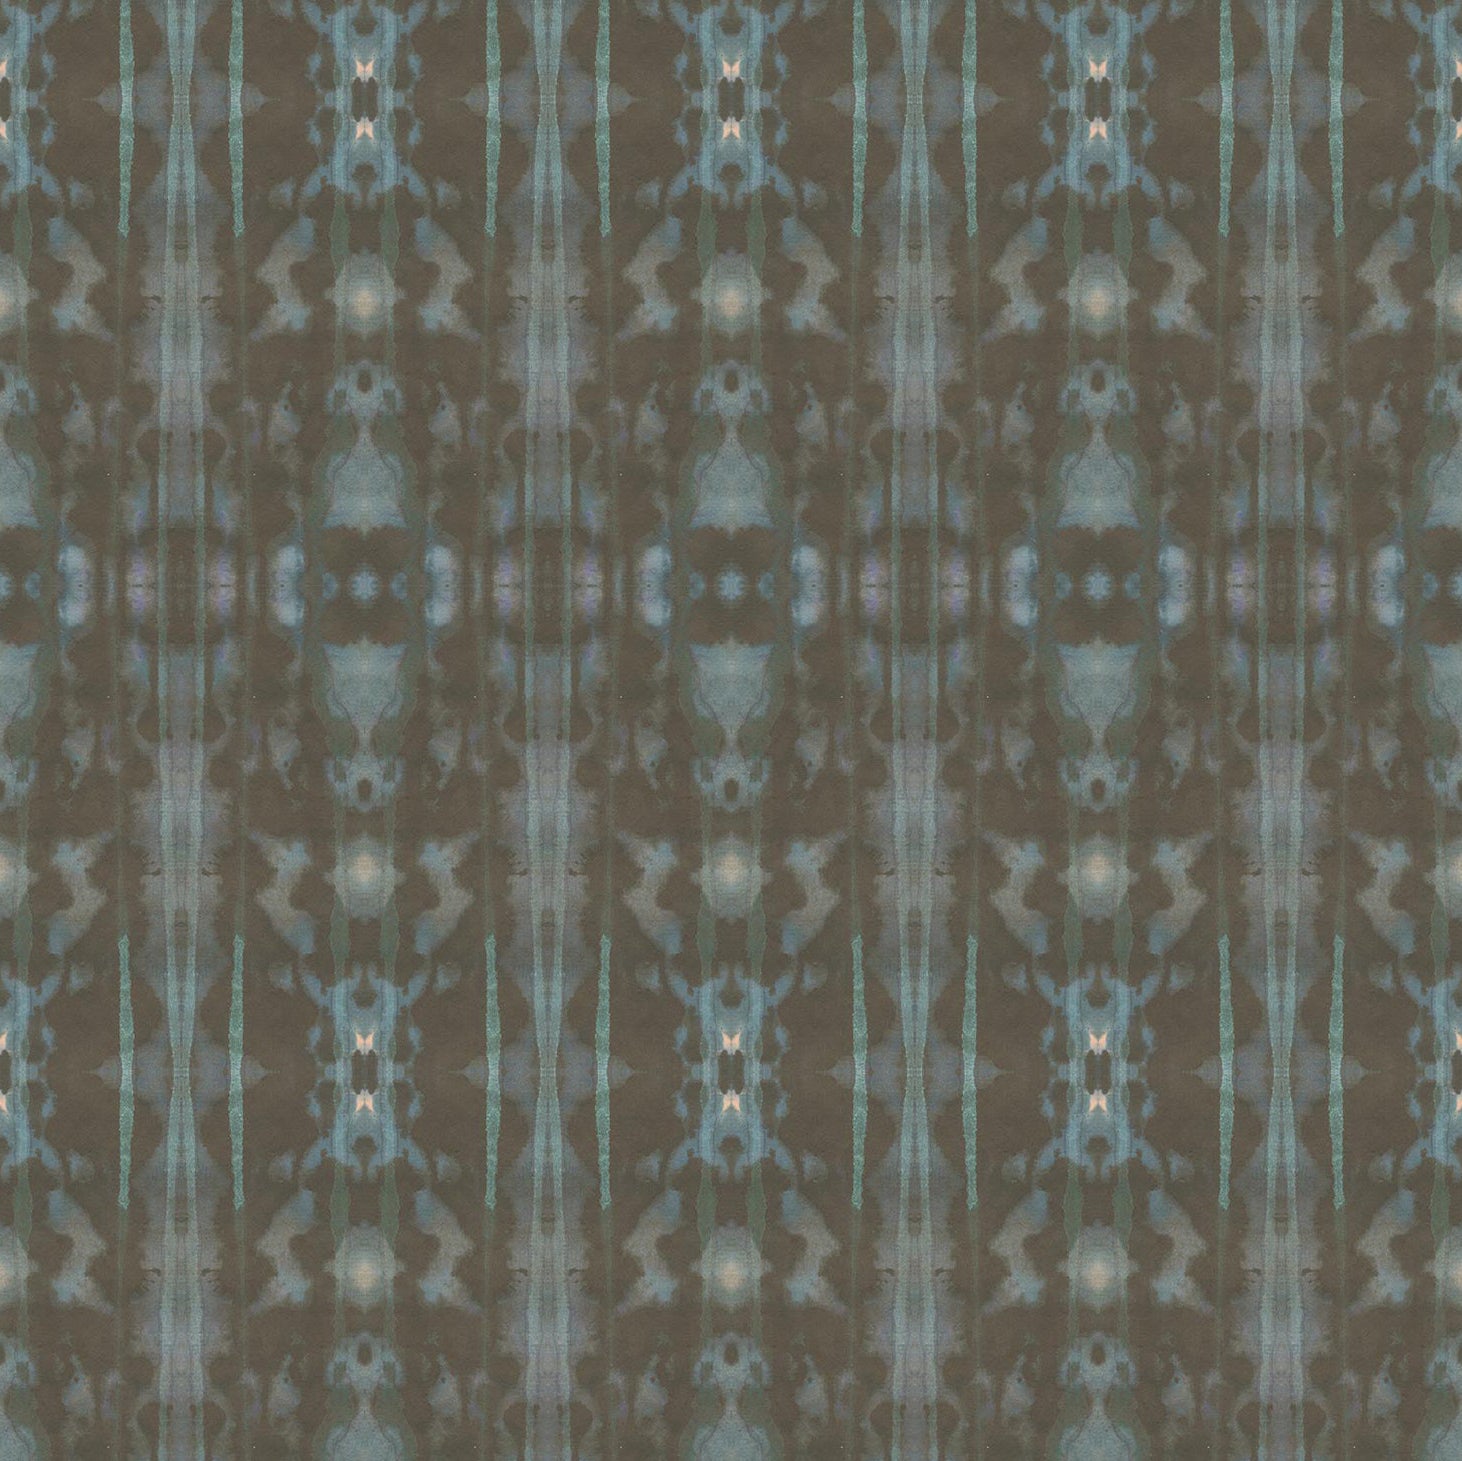 Detail of wallpaper in a painterly ikat print in turquoise and brown.